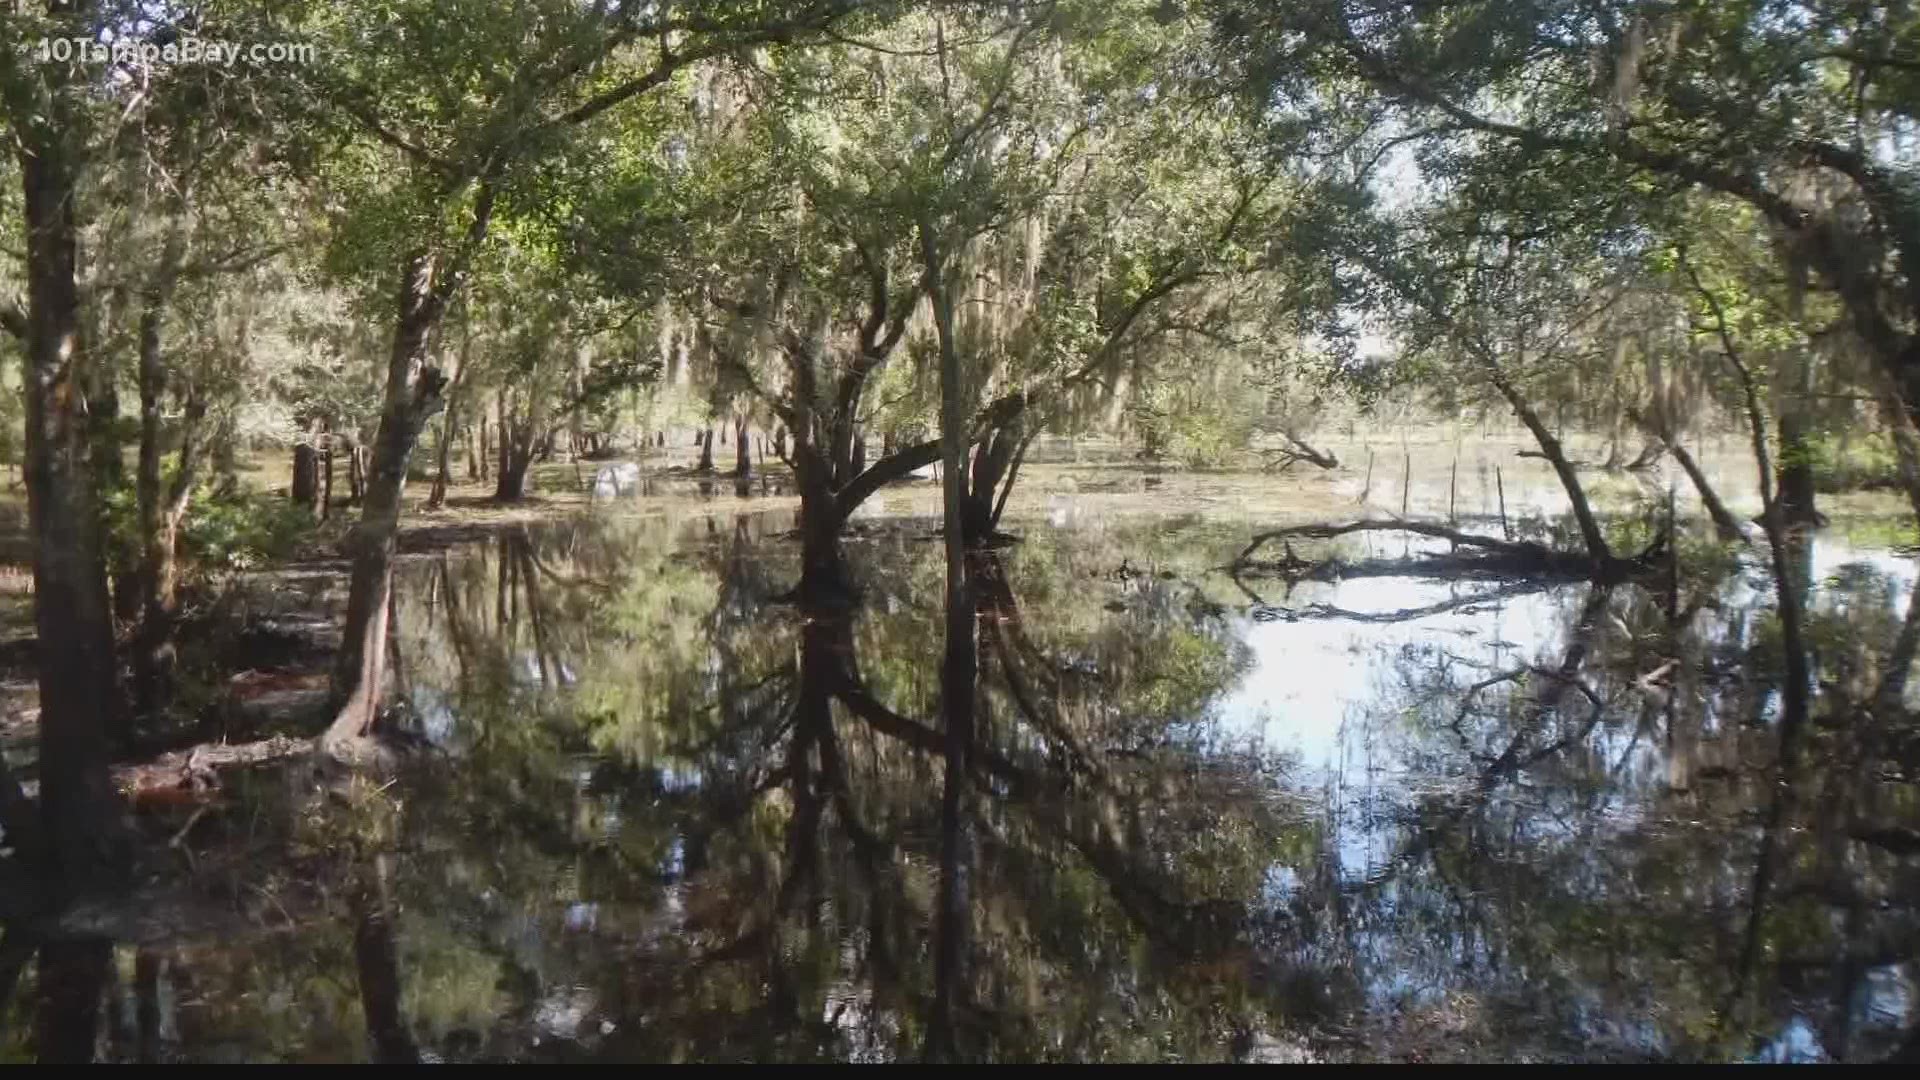 The Conservation Foundation of the Gulf Coast says the headwaters are part of the Myakka Headwaters Preserve.